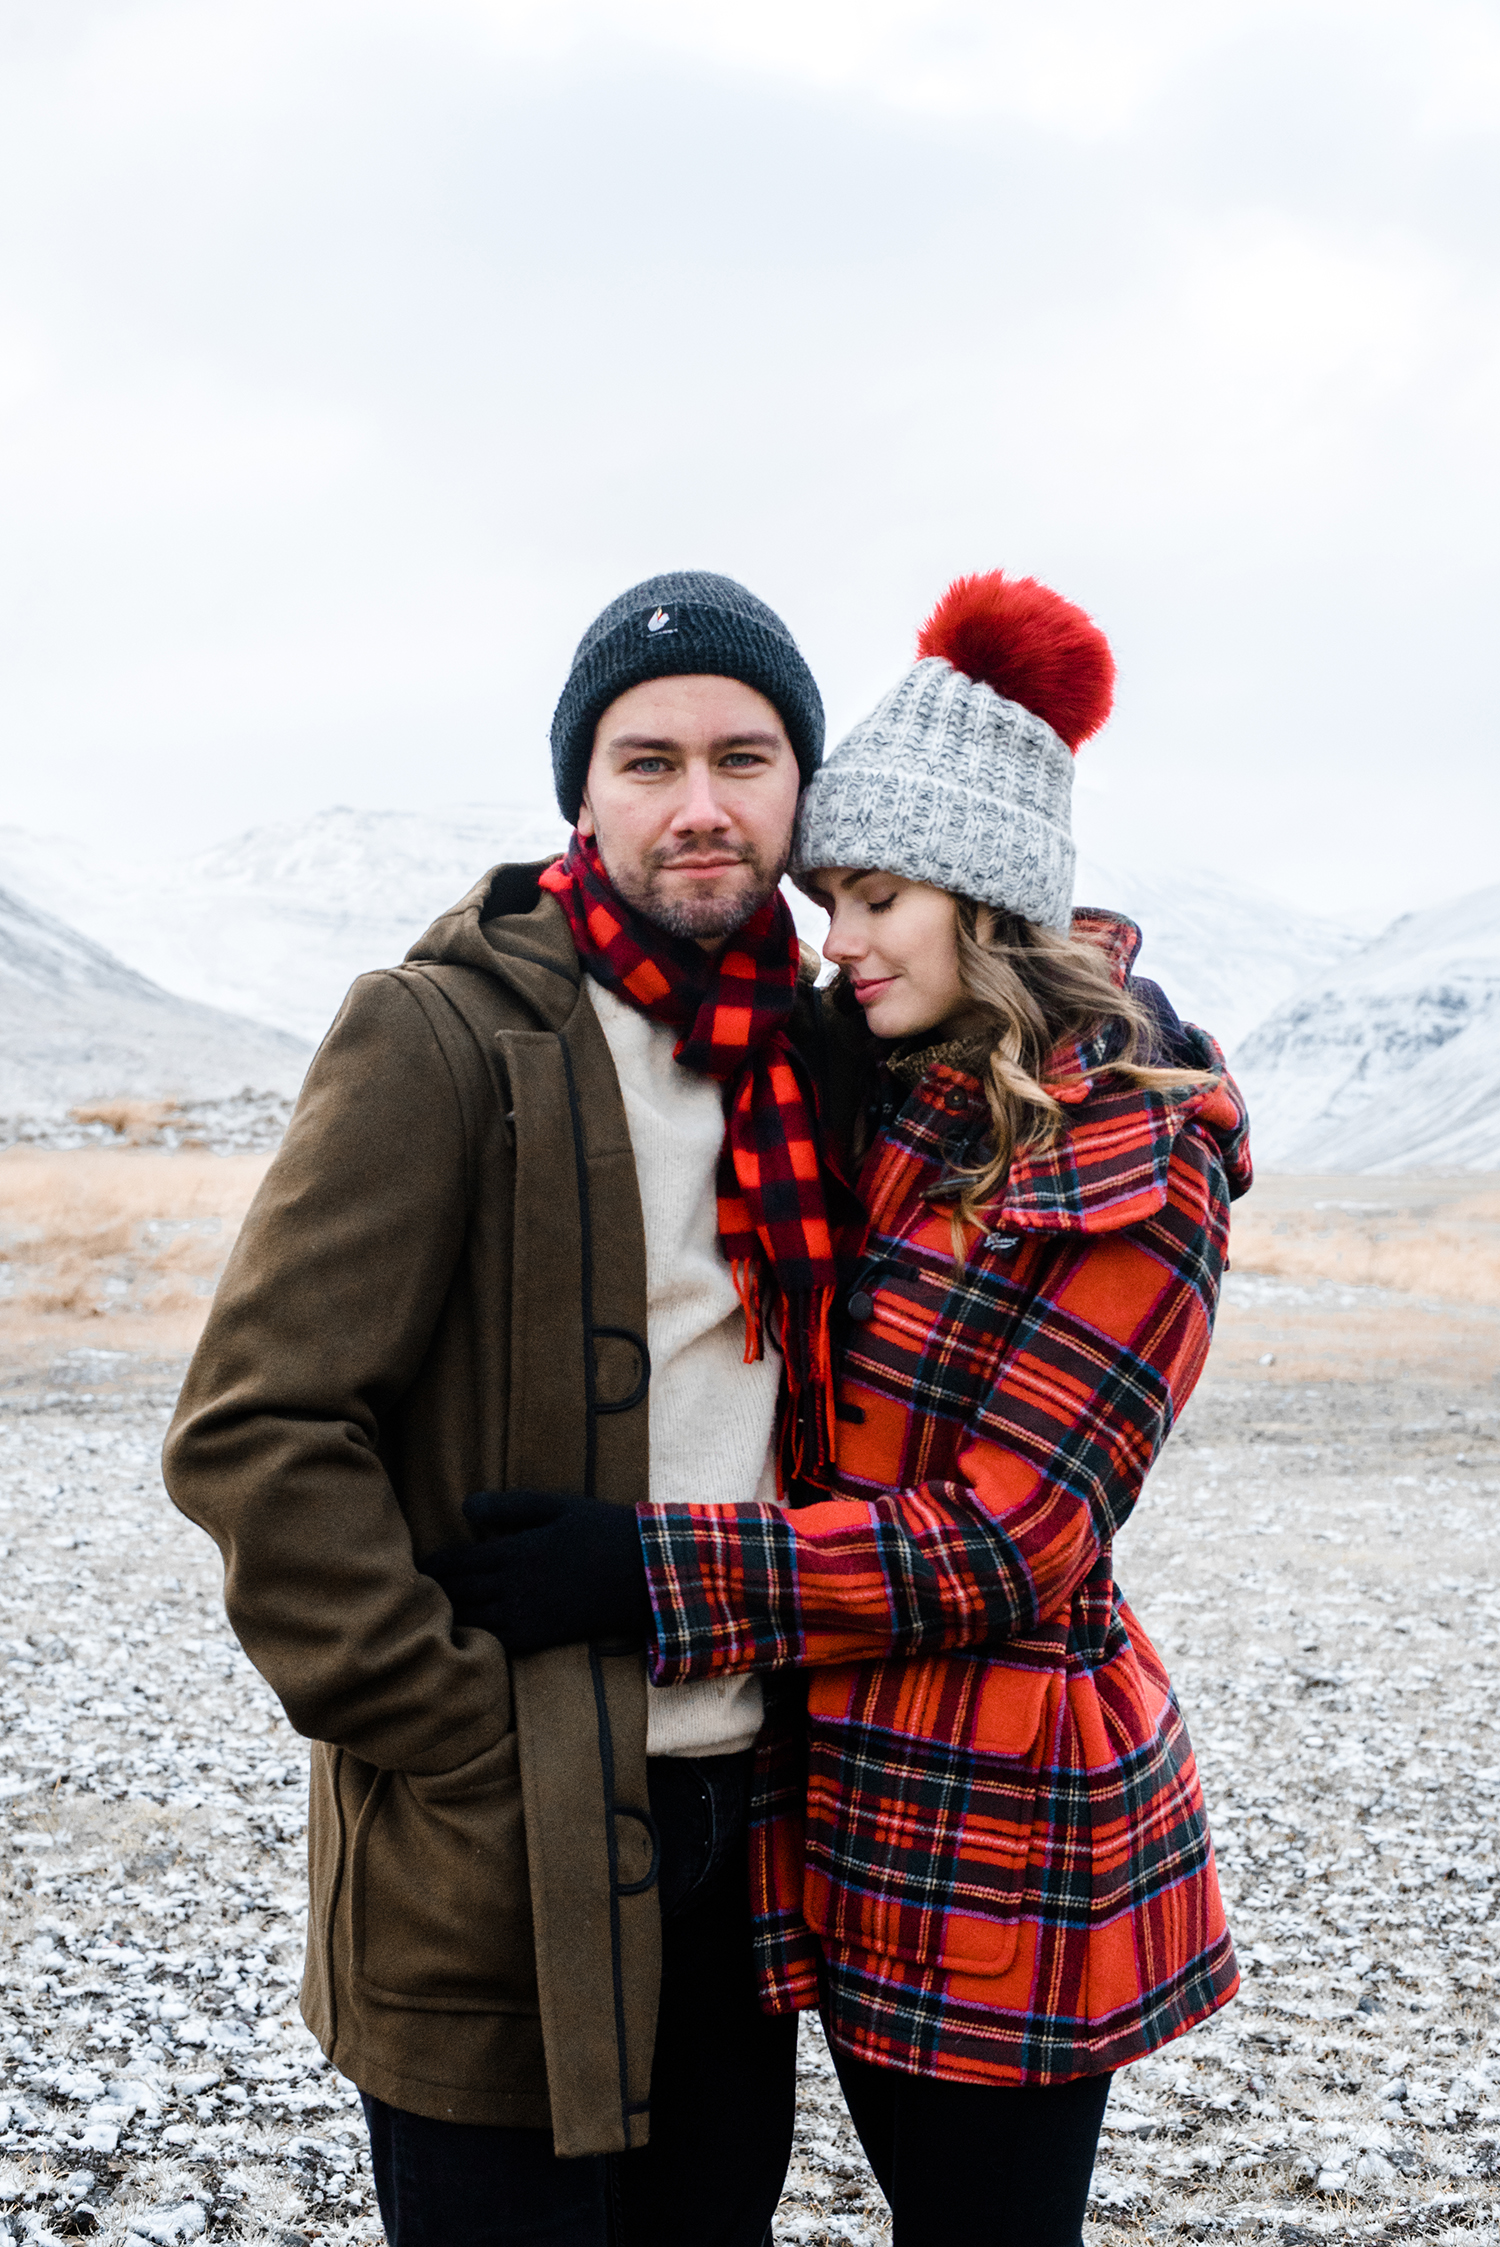 Torrance Coombs and Alyssa Campanella wish a Merry Christmas and Happy Holidays 2017 at Deplar Farm, Iceland